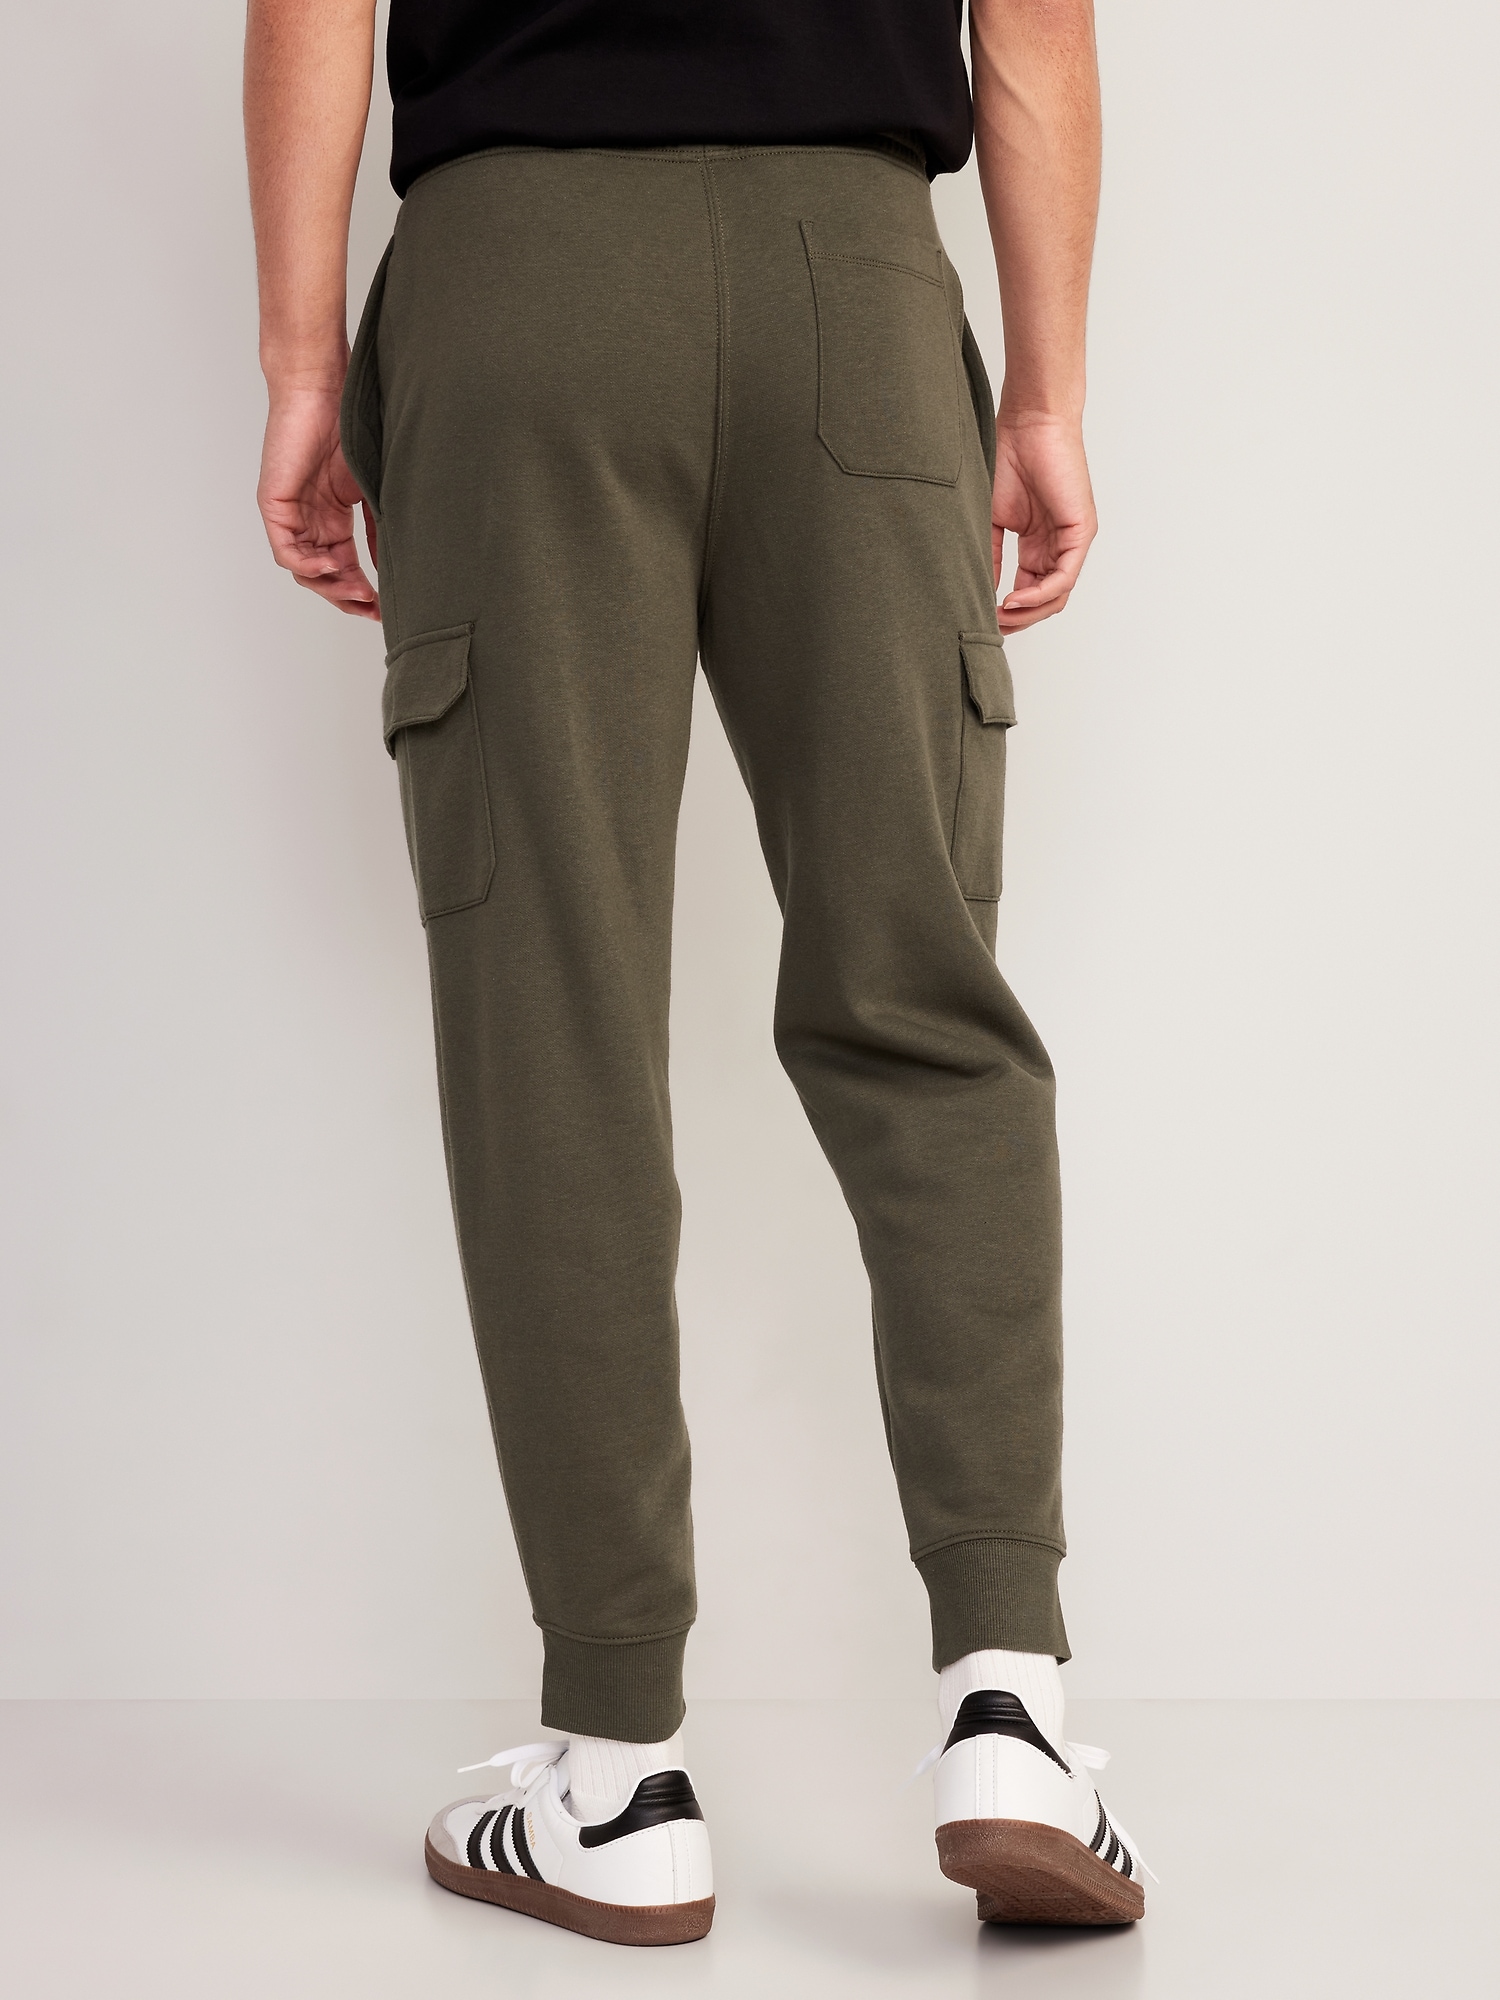 YWDJ Sweatpants for Men with Pockets Men Casual Trousers And